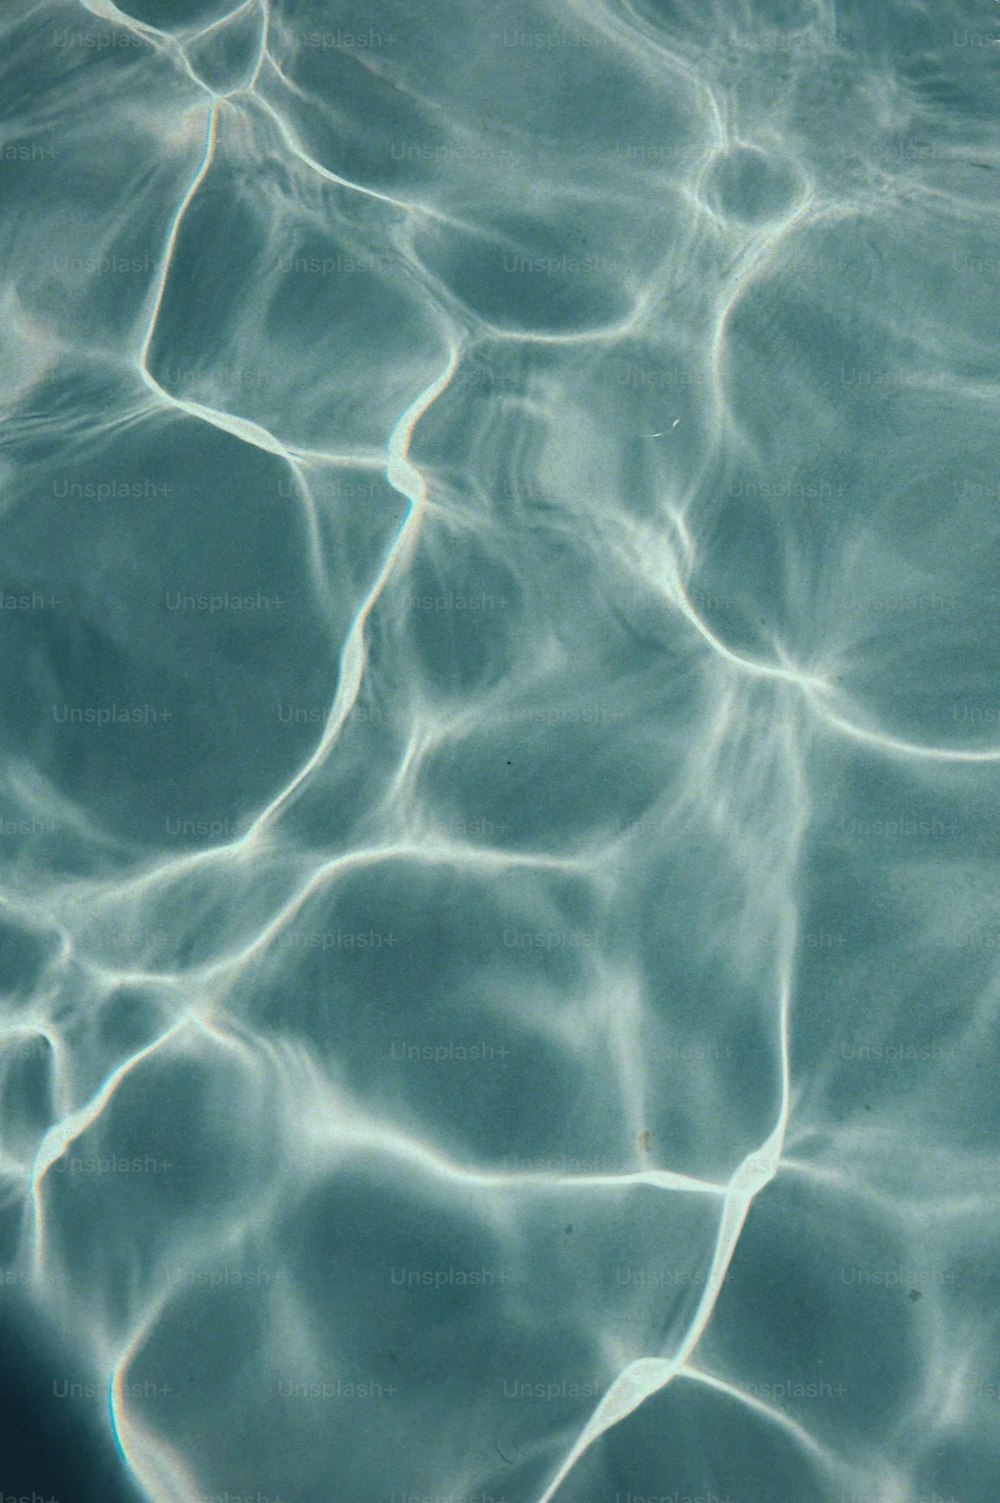 a close up of a pool with clear water